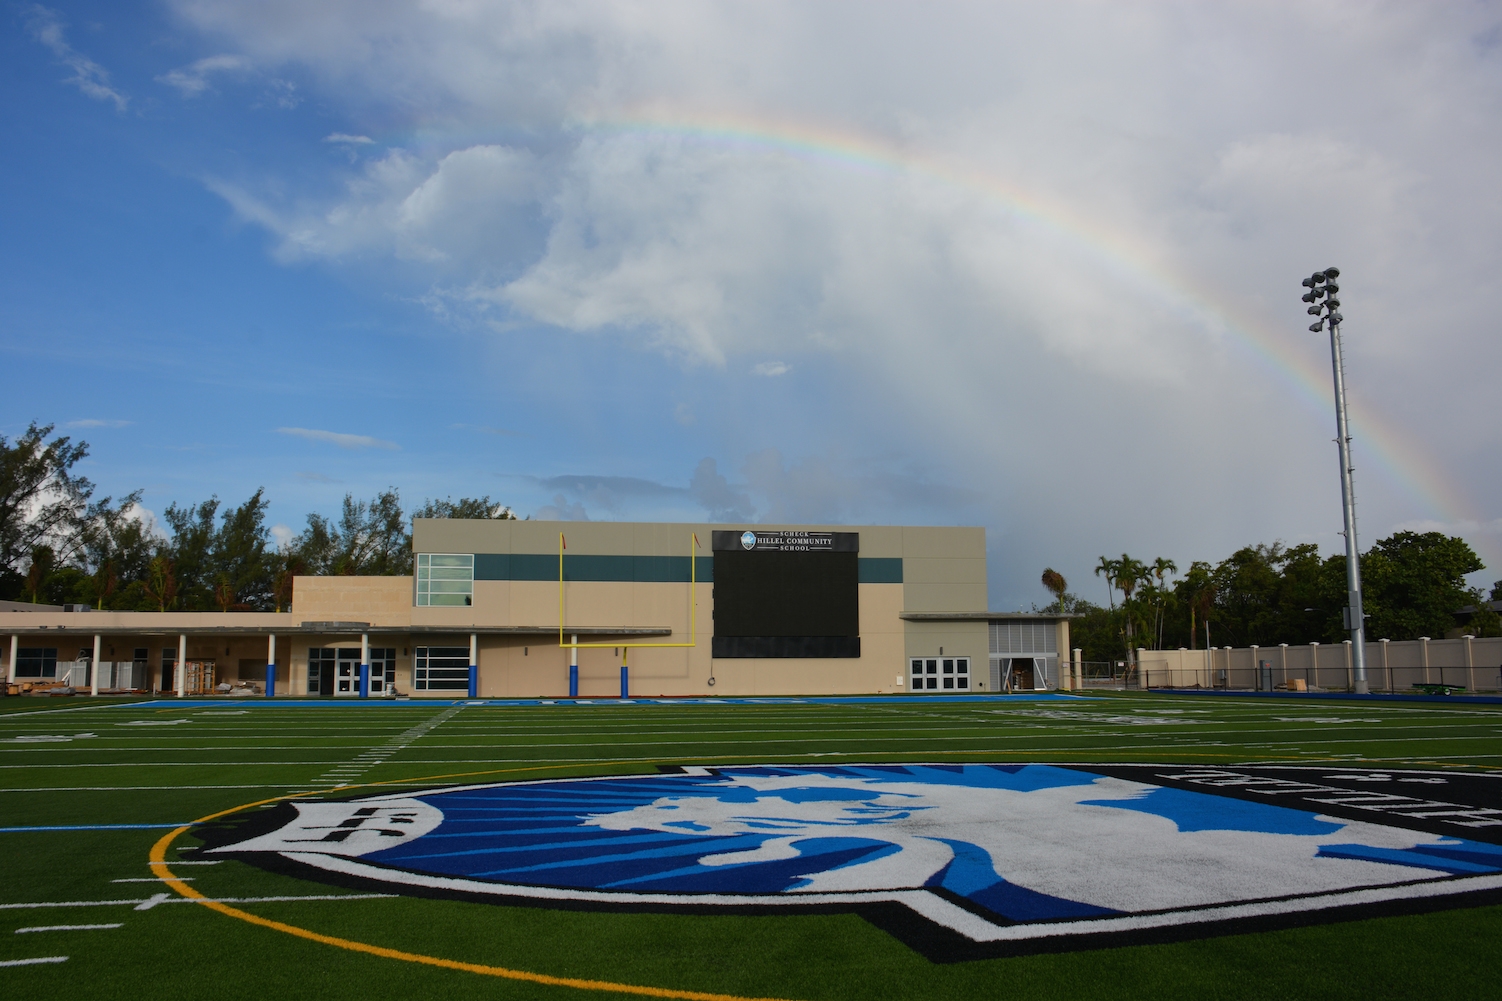 The new stadium at the Scheck Hillel Community Day School is part of a planned $22 million expansion at the South Florida school. (Courtesy Scheck Hillel Community Day School)